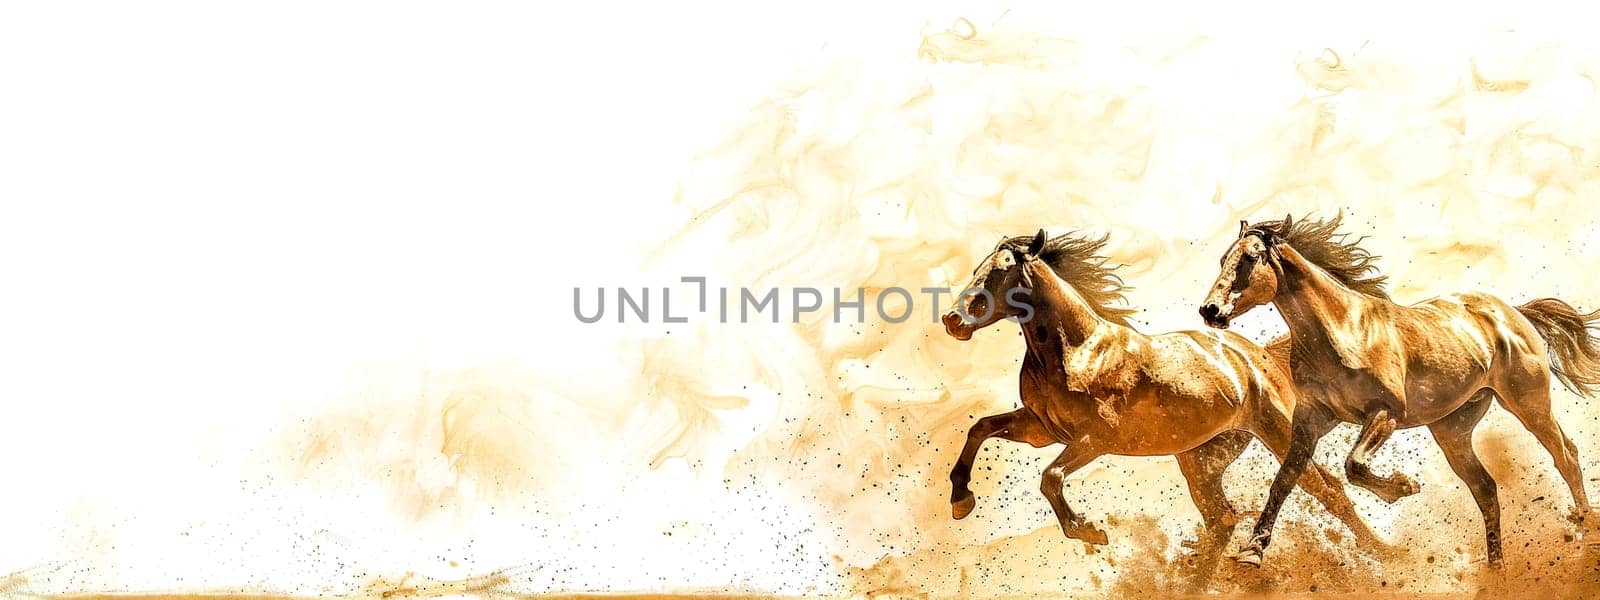 Energetic scene of two horses in motion with creative watercolor effects